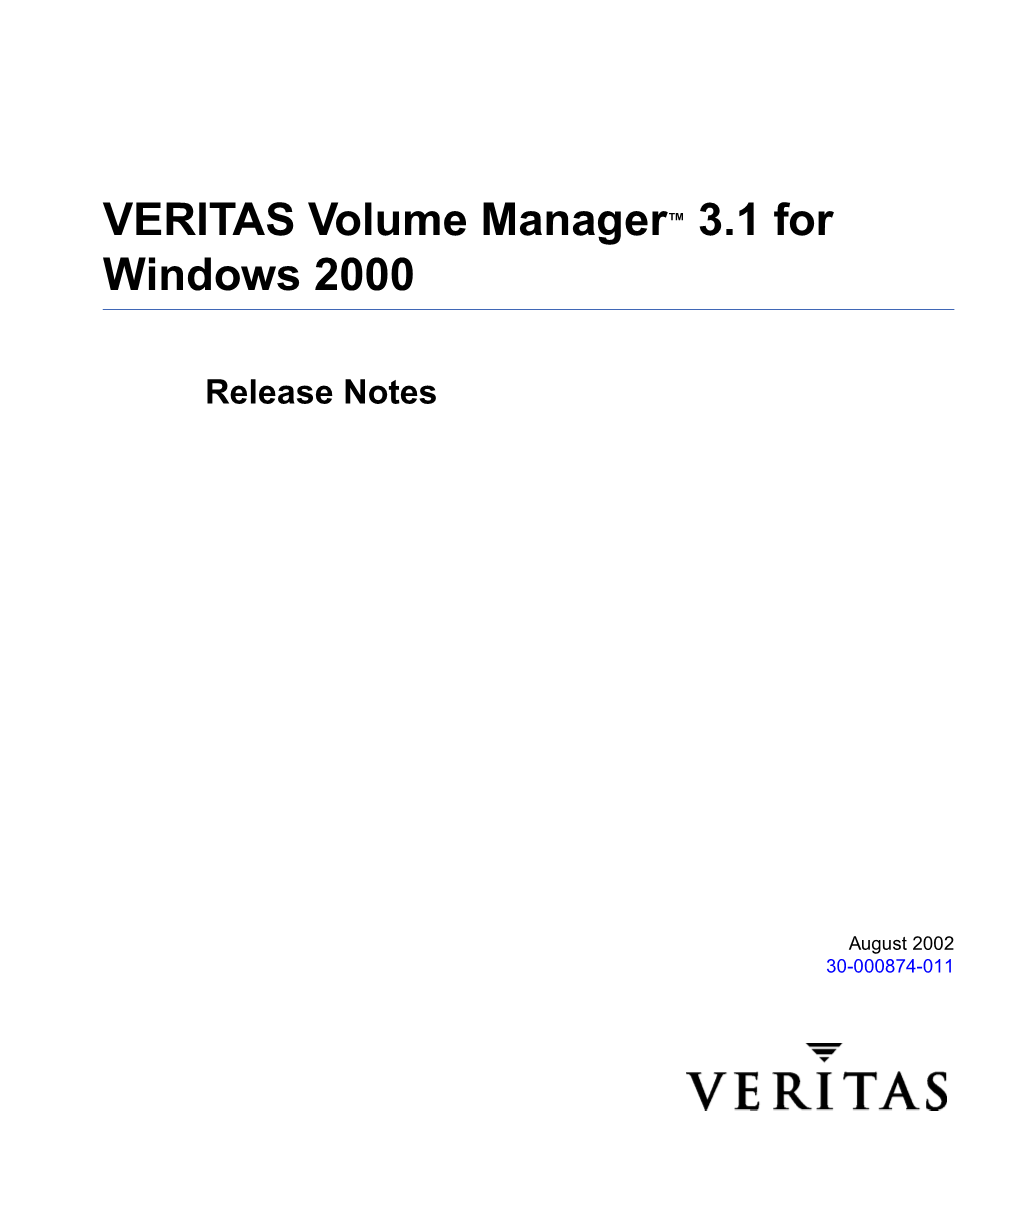 Volume Manager 3.1 for Windows 2000 Release Notes Introduction